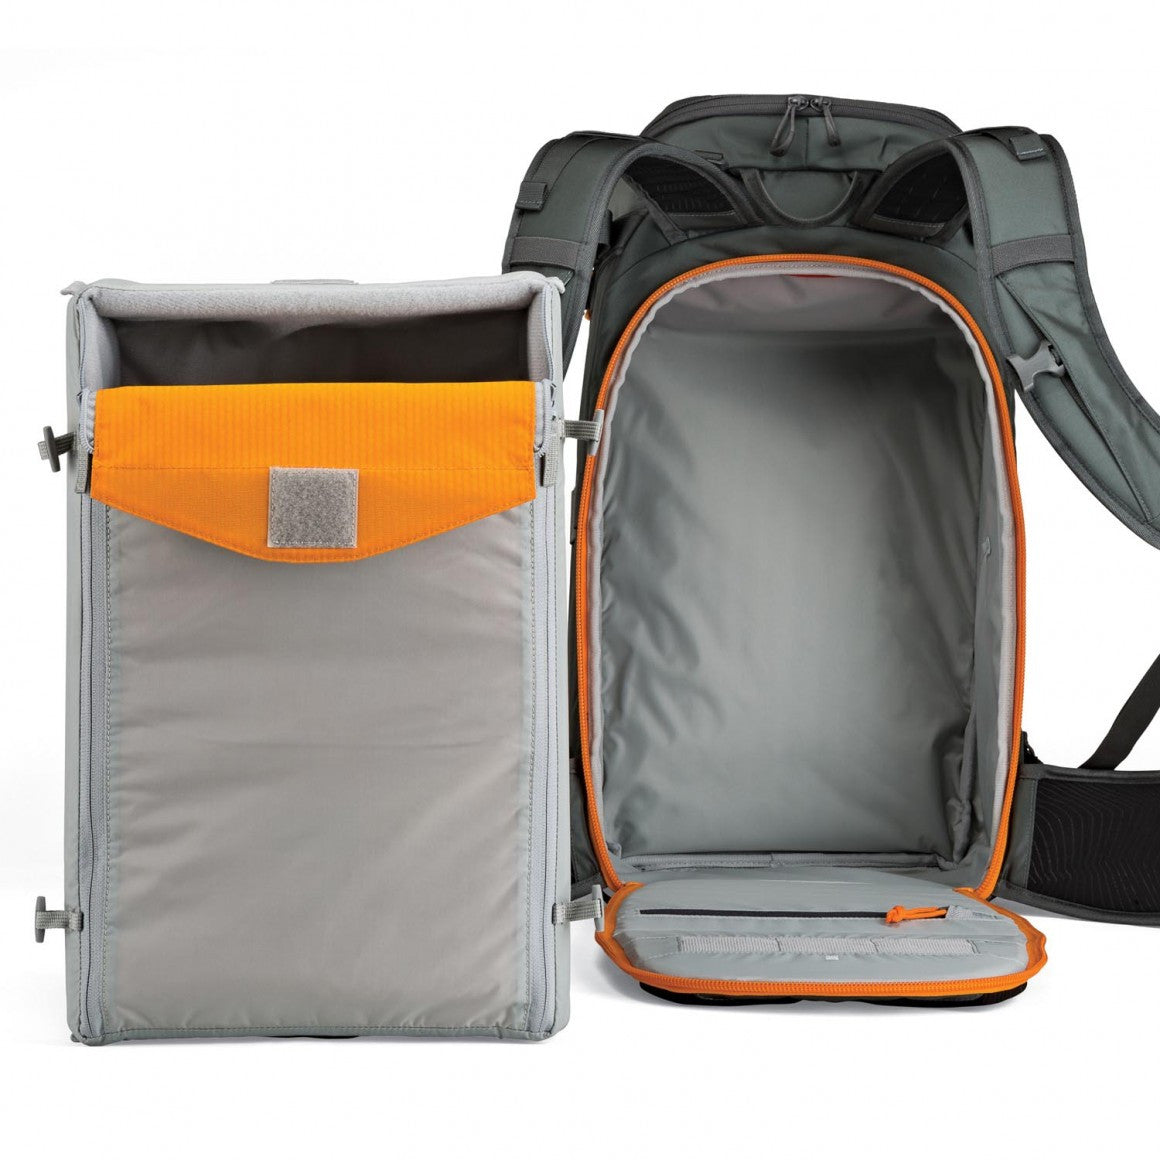 Lowepro Whistler 450AW Backpack (Grey), bags backpacks, Lowepro - Pictureline  - 5